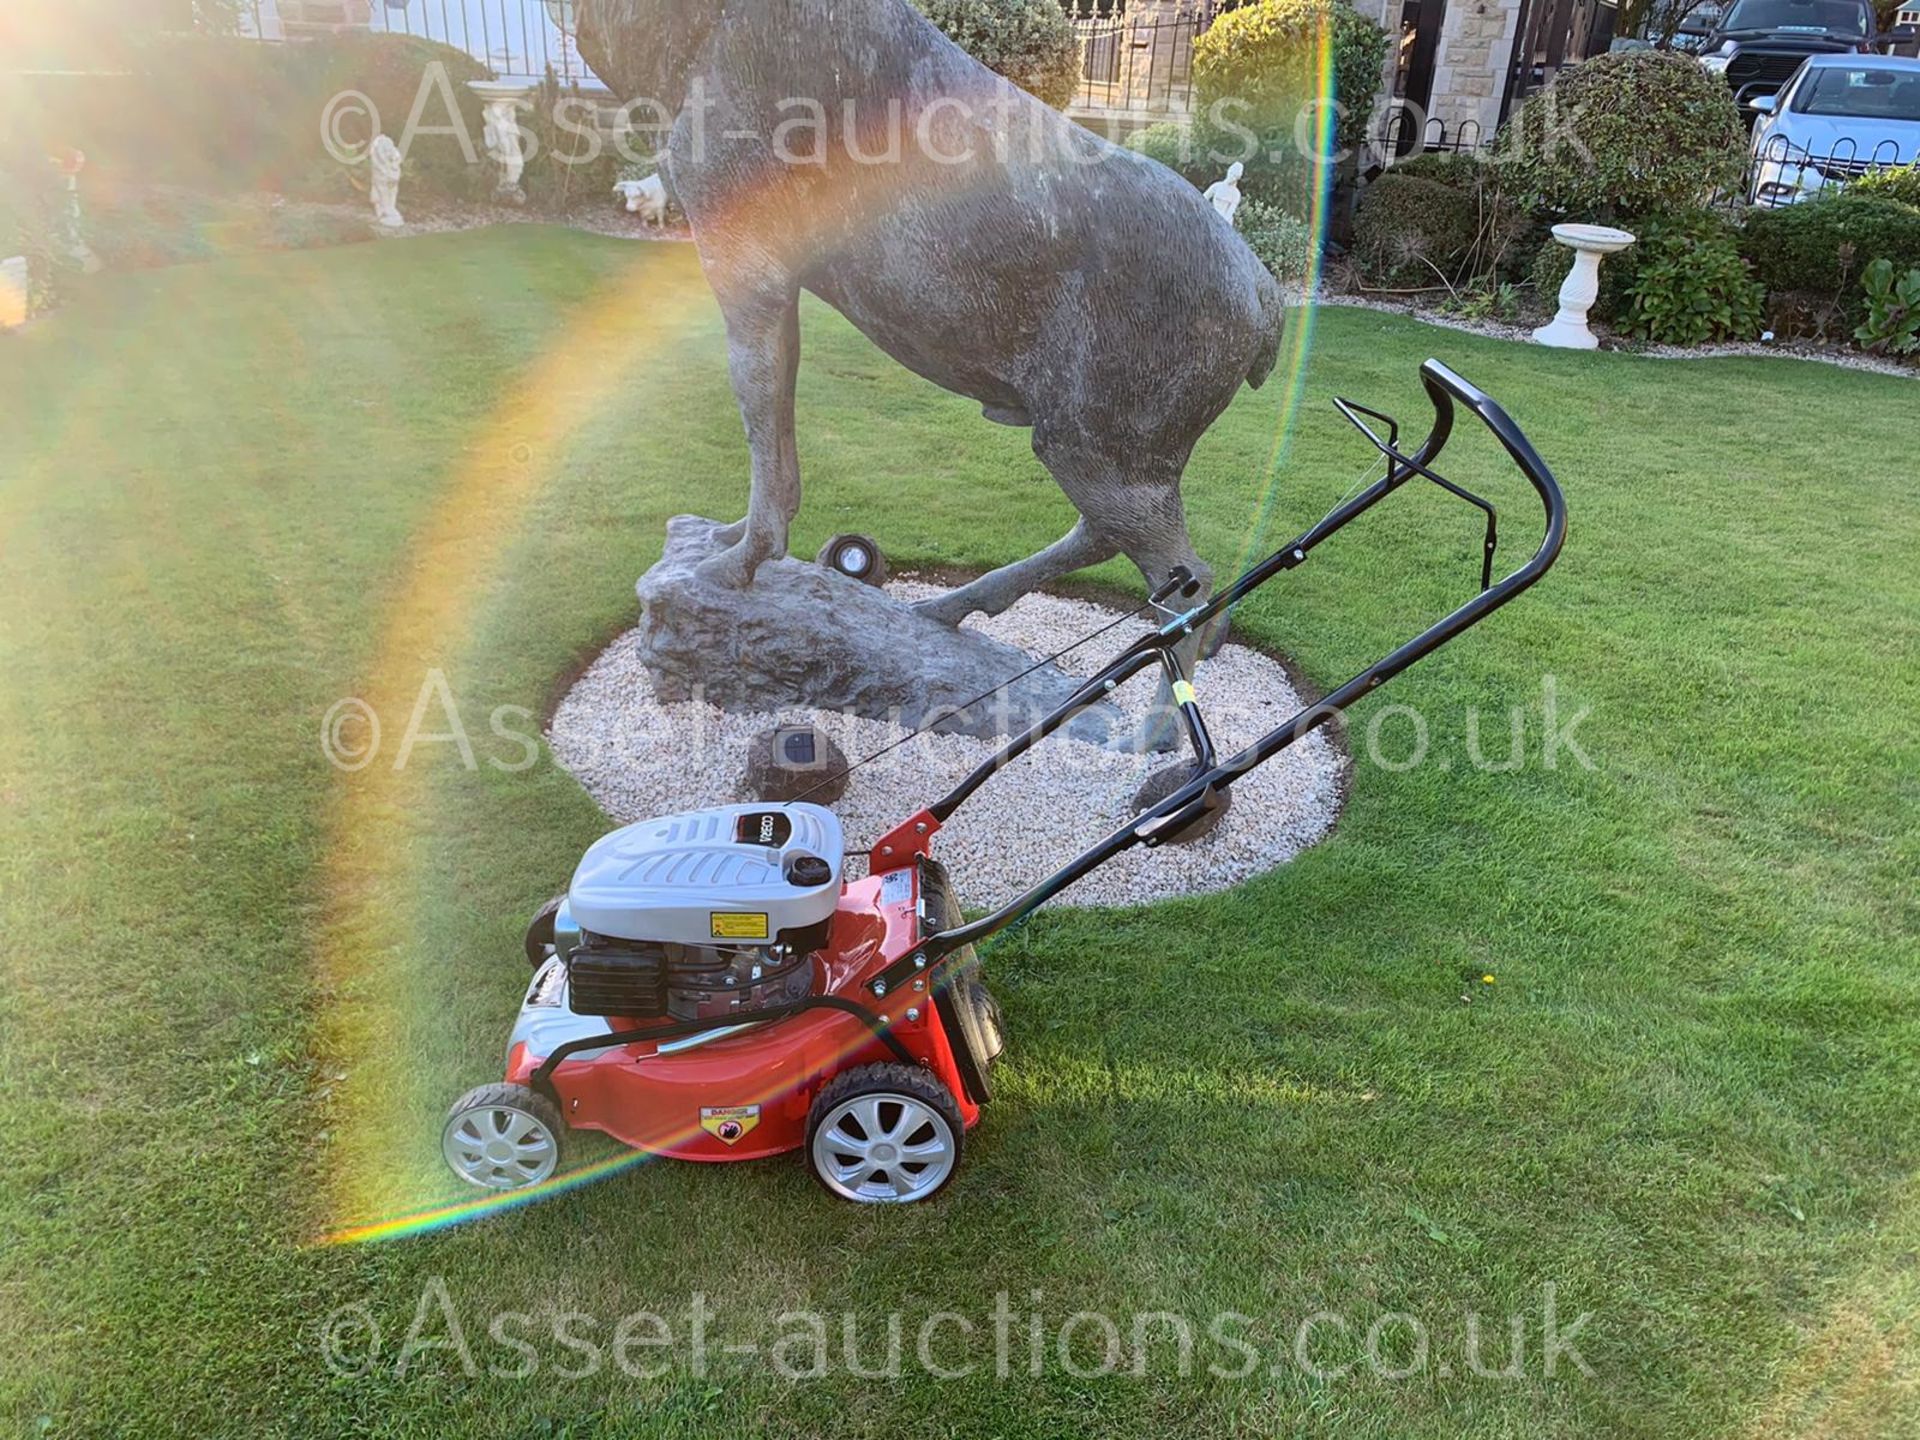 2016 COBRA M40C LAWN MOWER, RUNS AND WORKS WELL, ONLY USED A FEW TIMES, PULL START *NO VAT* - Image 5 of 18